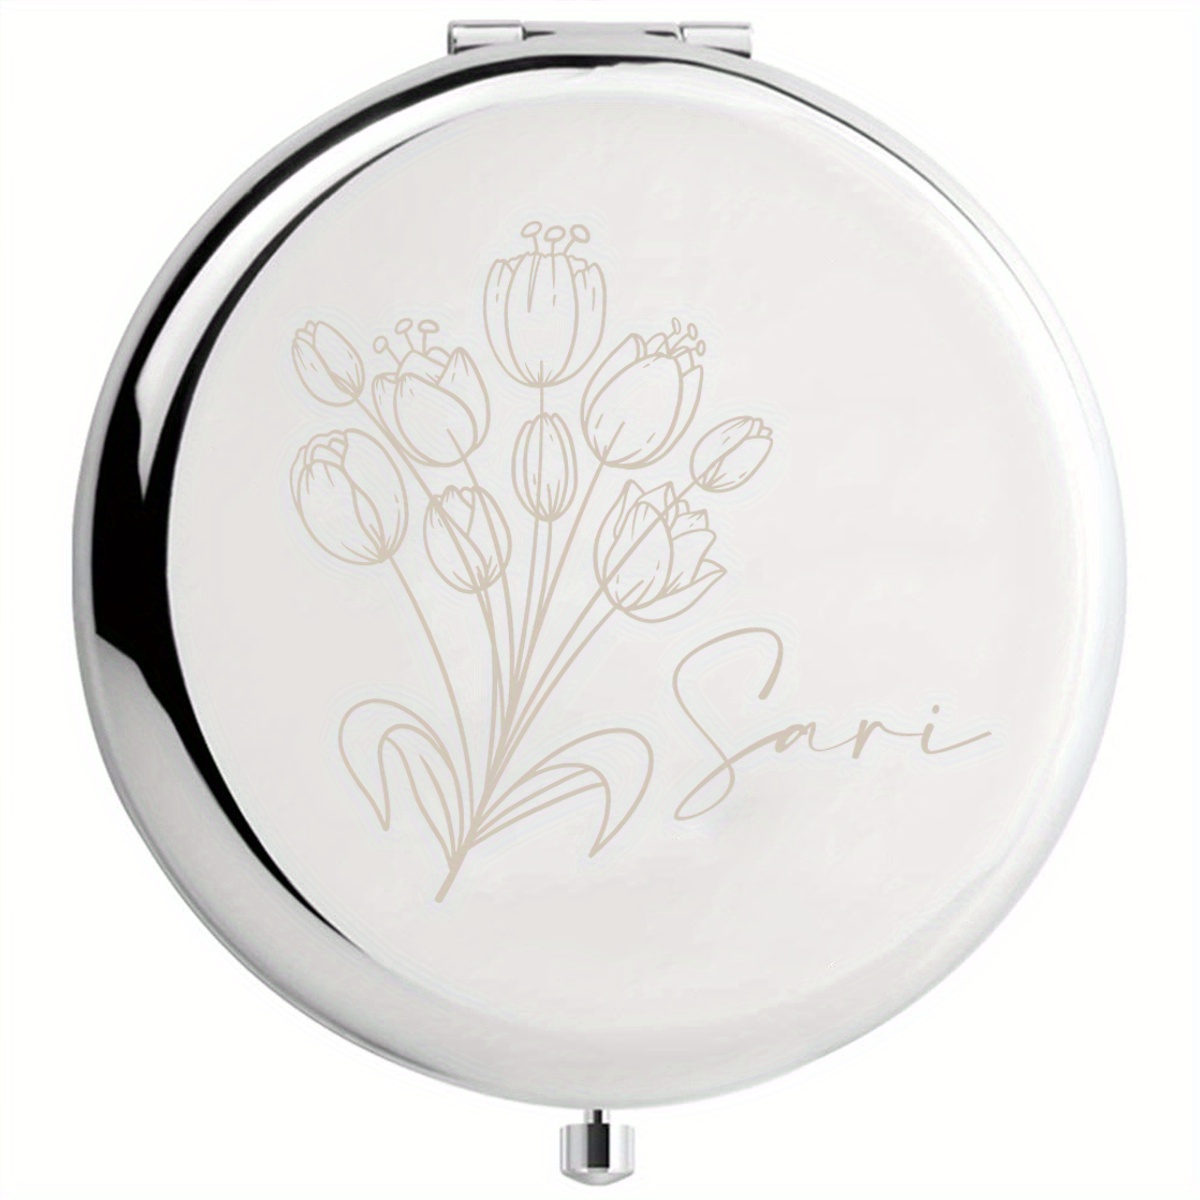 

1pc, Personalized Name Delicate Tulip Flower Mirror Compact, A Portable Folding Mirror For Makeup, A Perfect Gift For Graduation, Sister, Friends, Parties, Birthdays, And Mother's Day